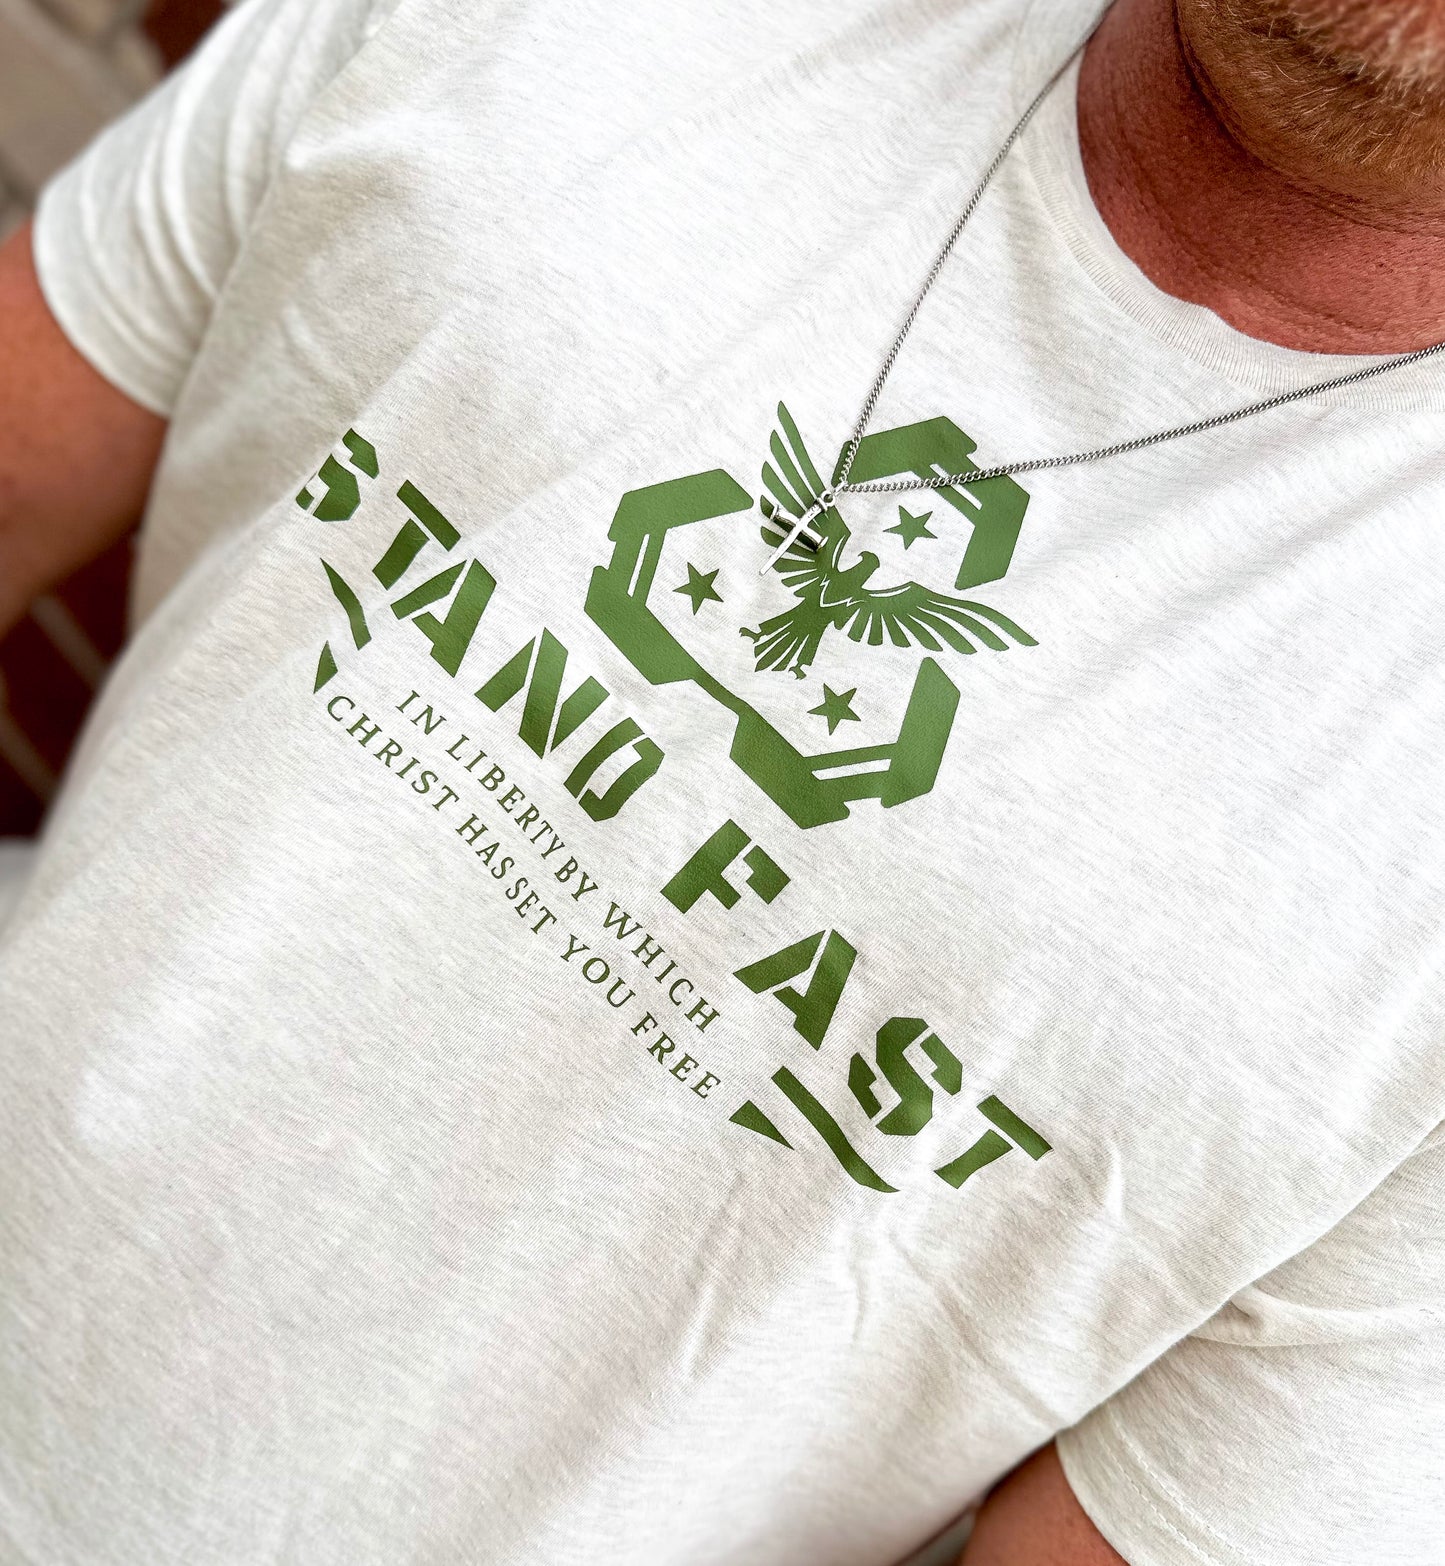 Stand Fast Shirt